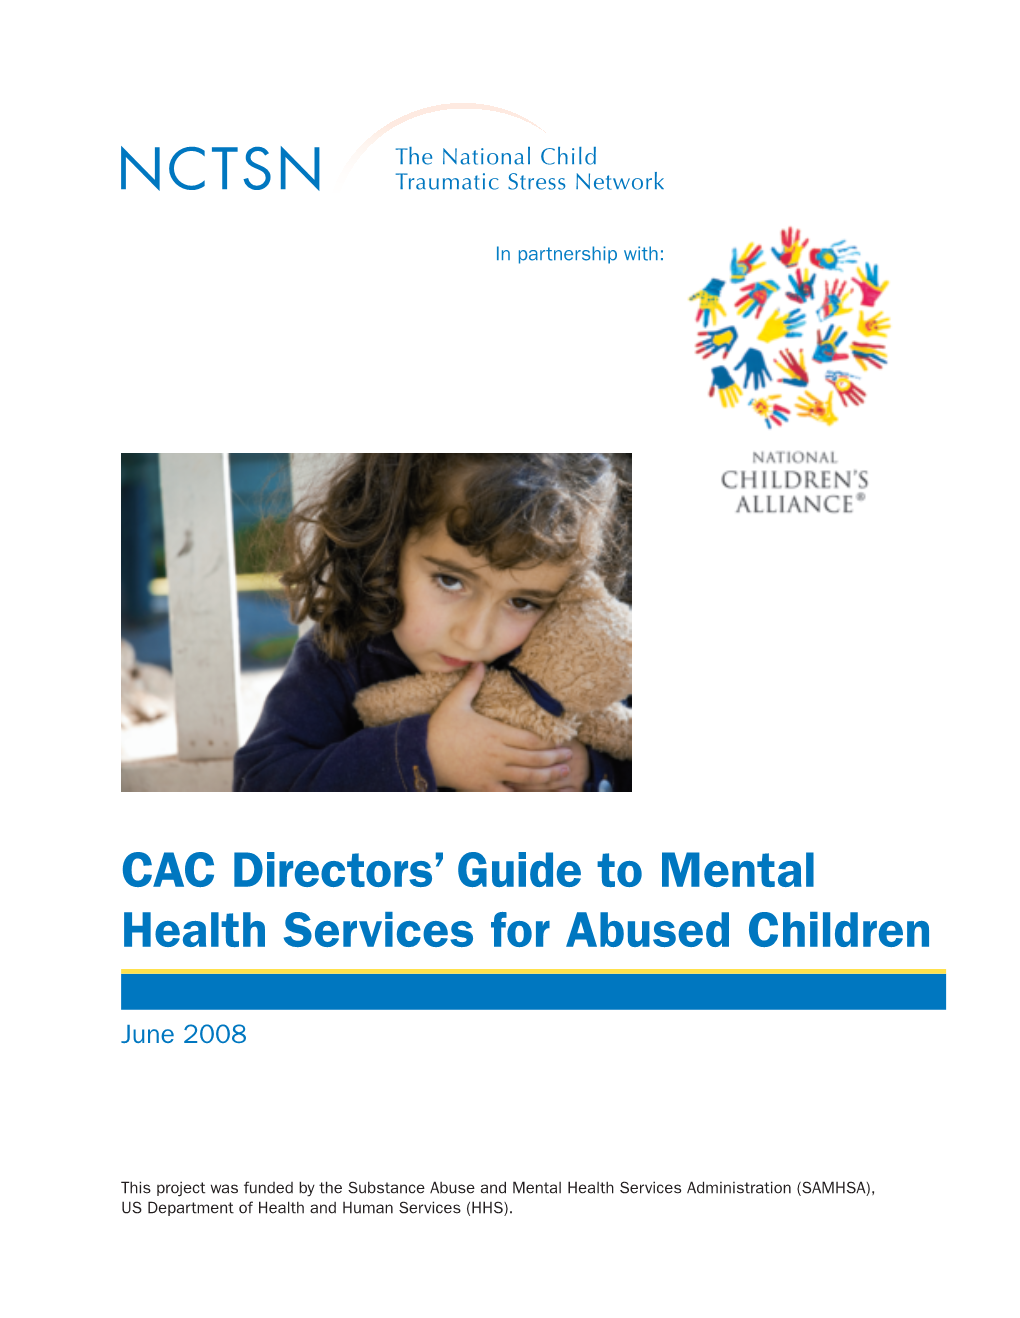 CAC Directors' Guide to Mental Health Services for Abused Children